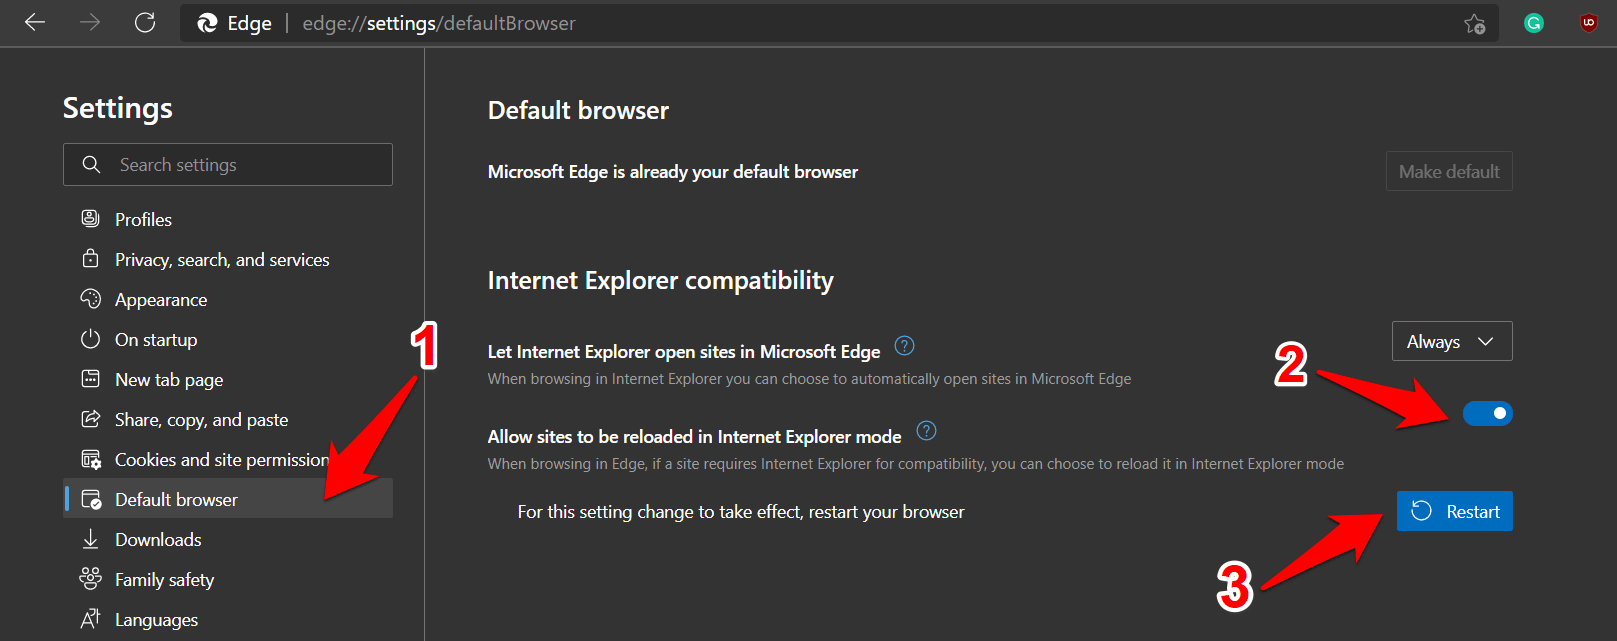 Enable Allow Sites to be Reloaded in Internet Explorer Mode toggle